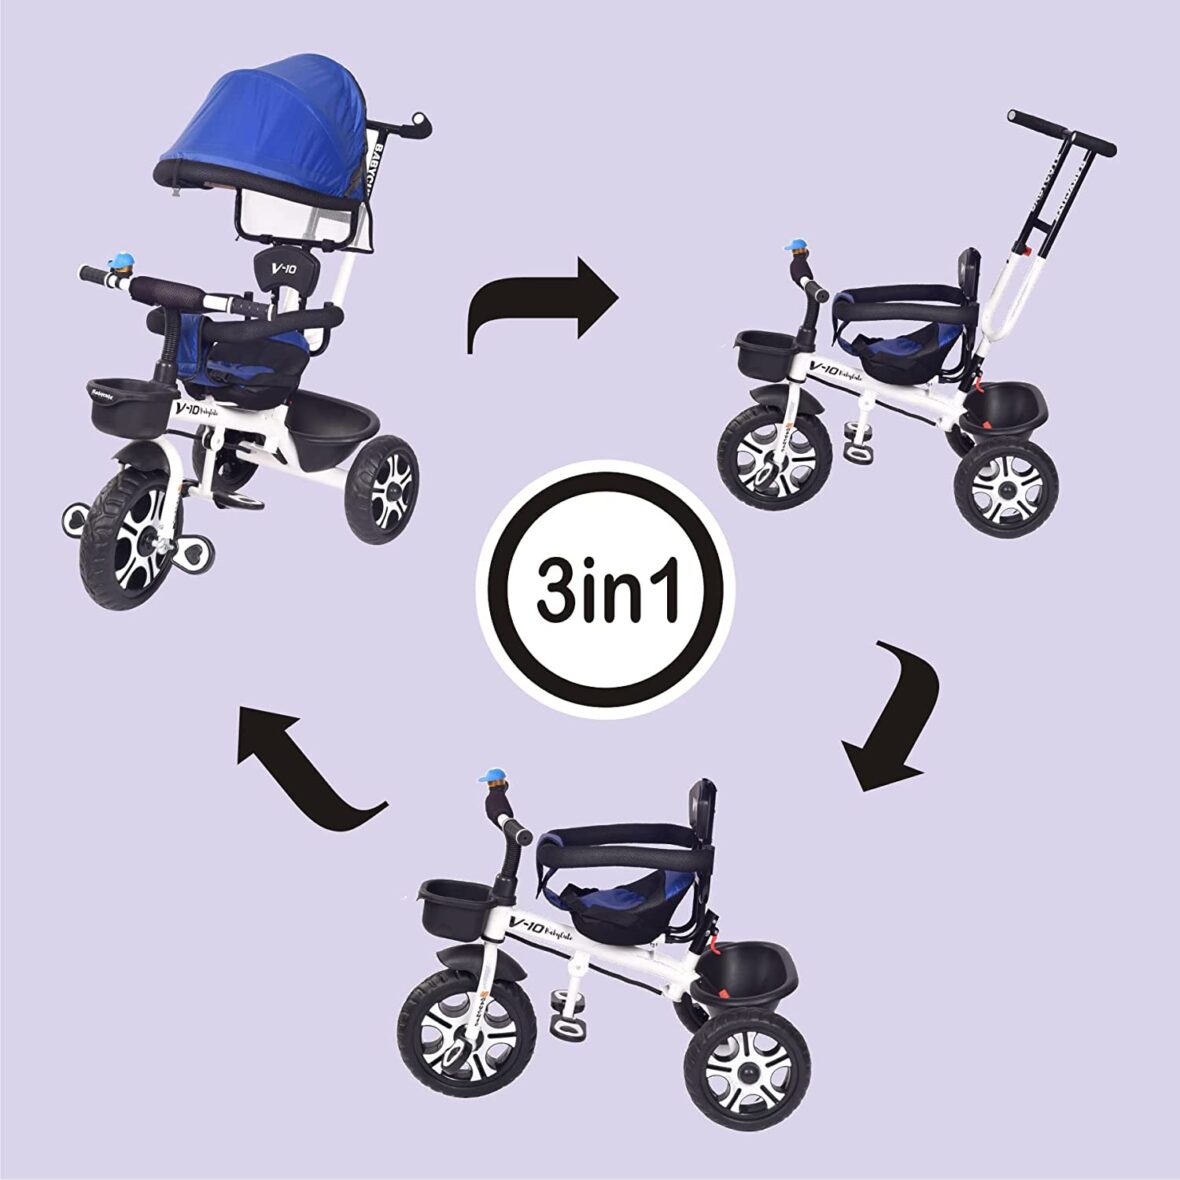 BabyCute v10 Tricycle For Kids with Canopy and Parental Control by U smile Baby World